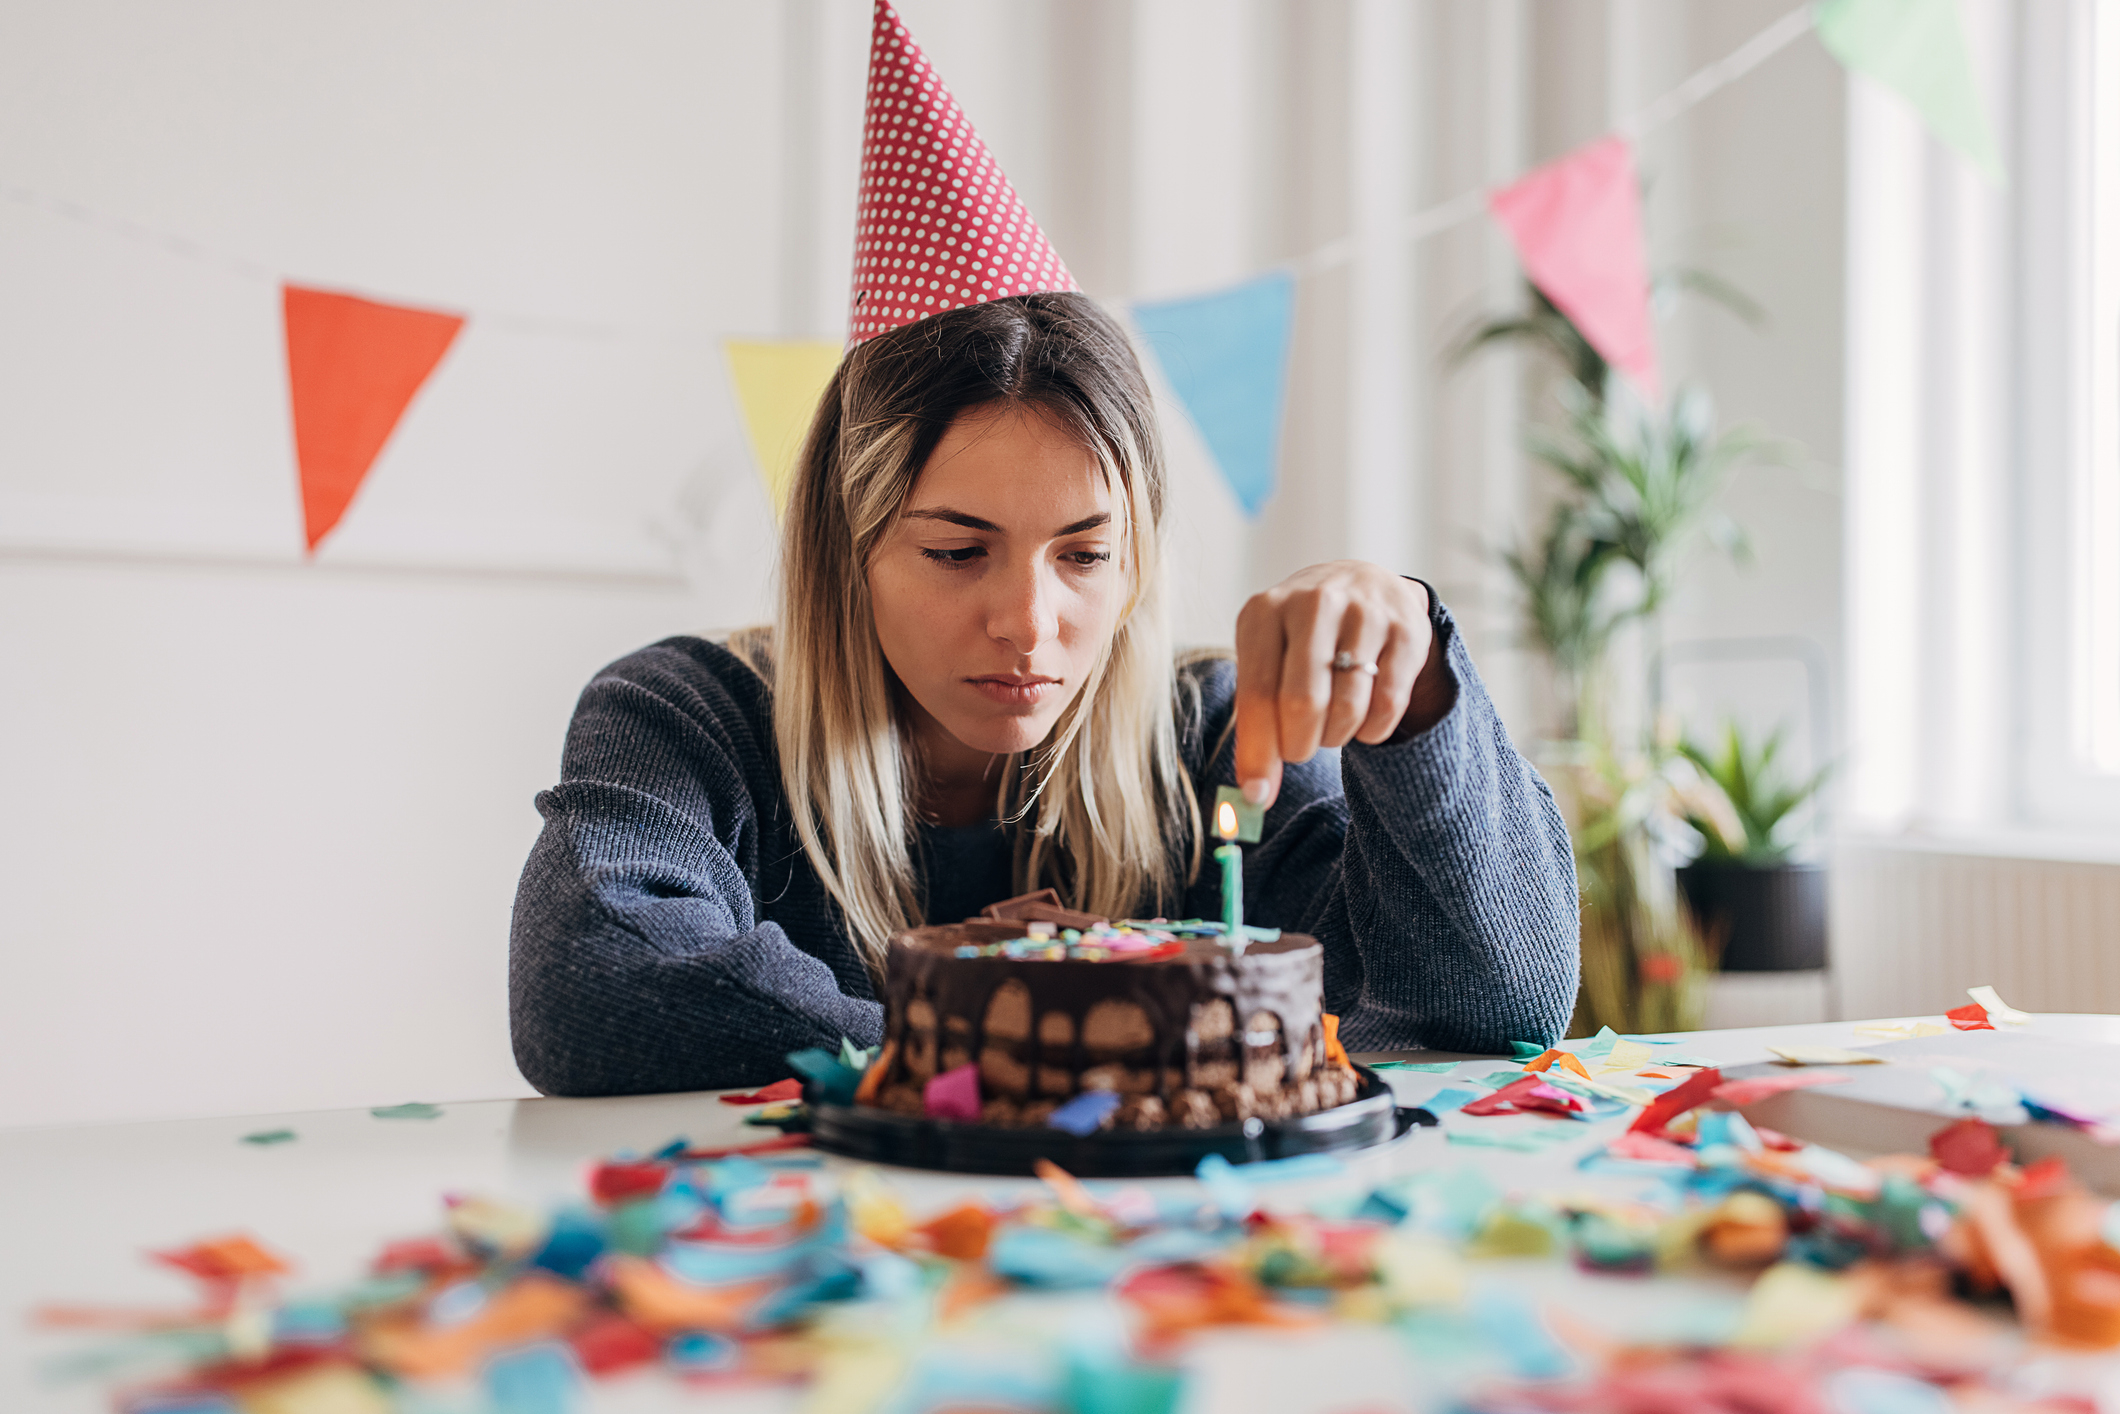 Sad-looking young woman at a table looks at a birthday cake with candles, party hats and confetti around